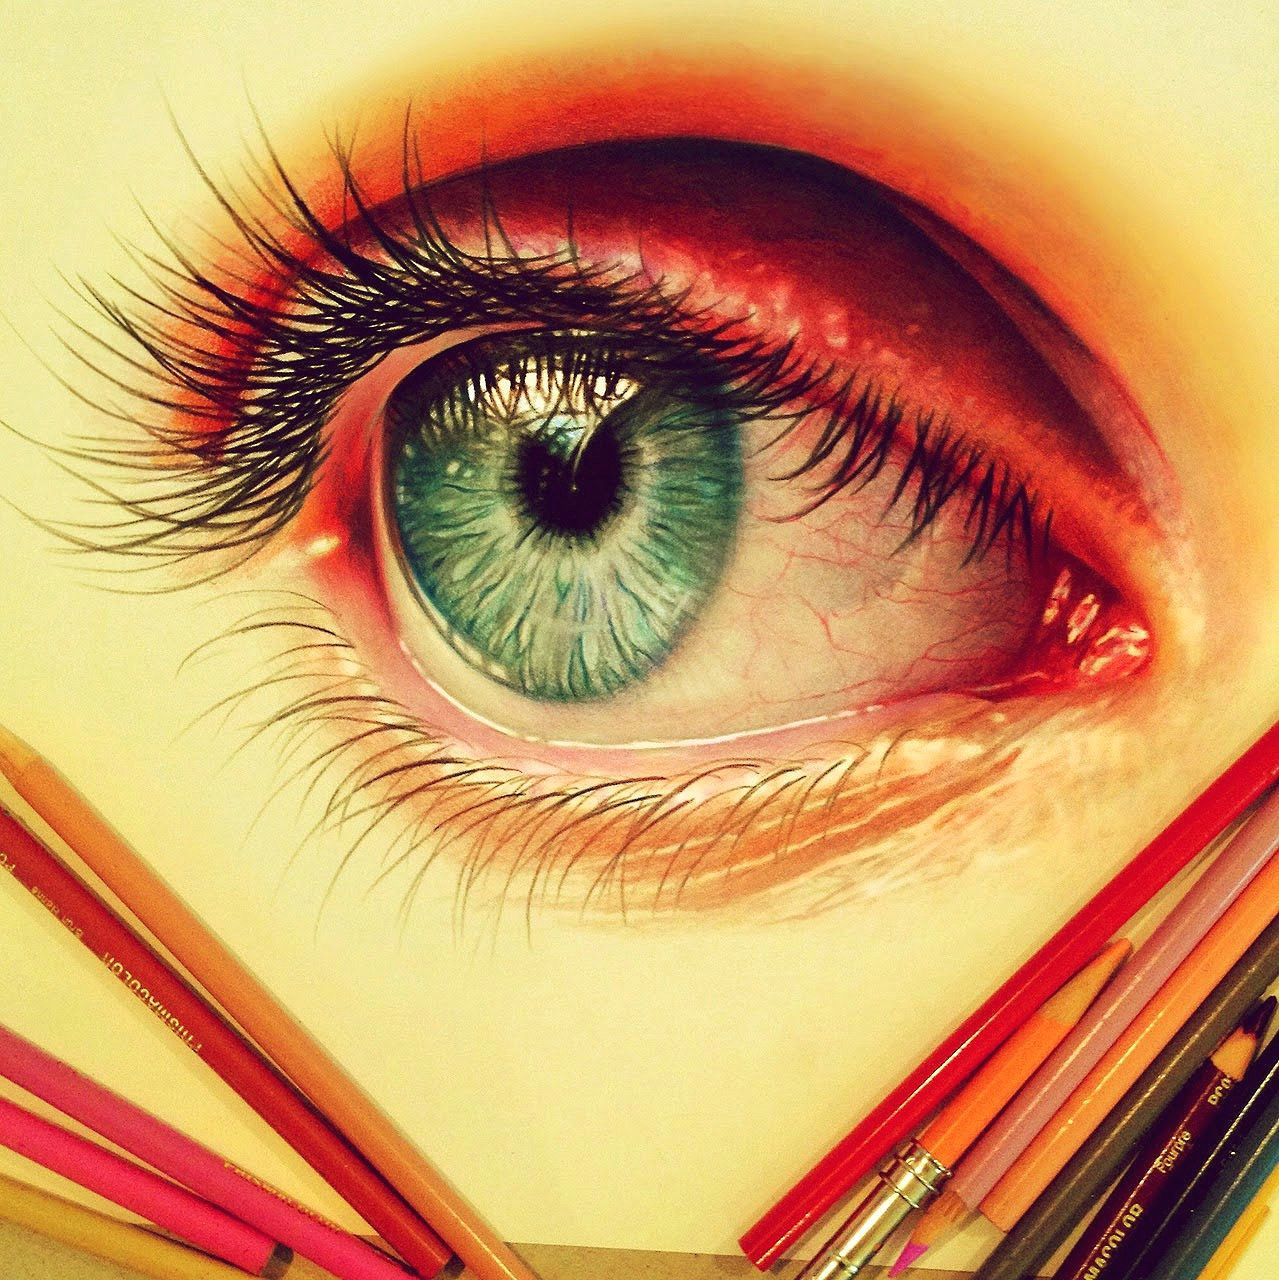 Drawing Of An Eye Colour Realistic Pencil Drawings by Morgan Davidson Illustration